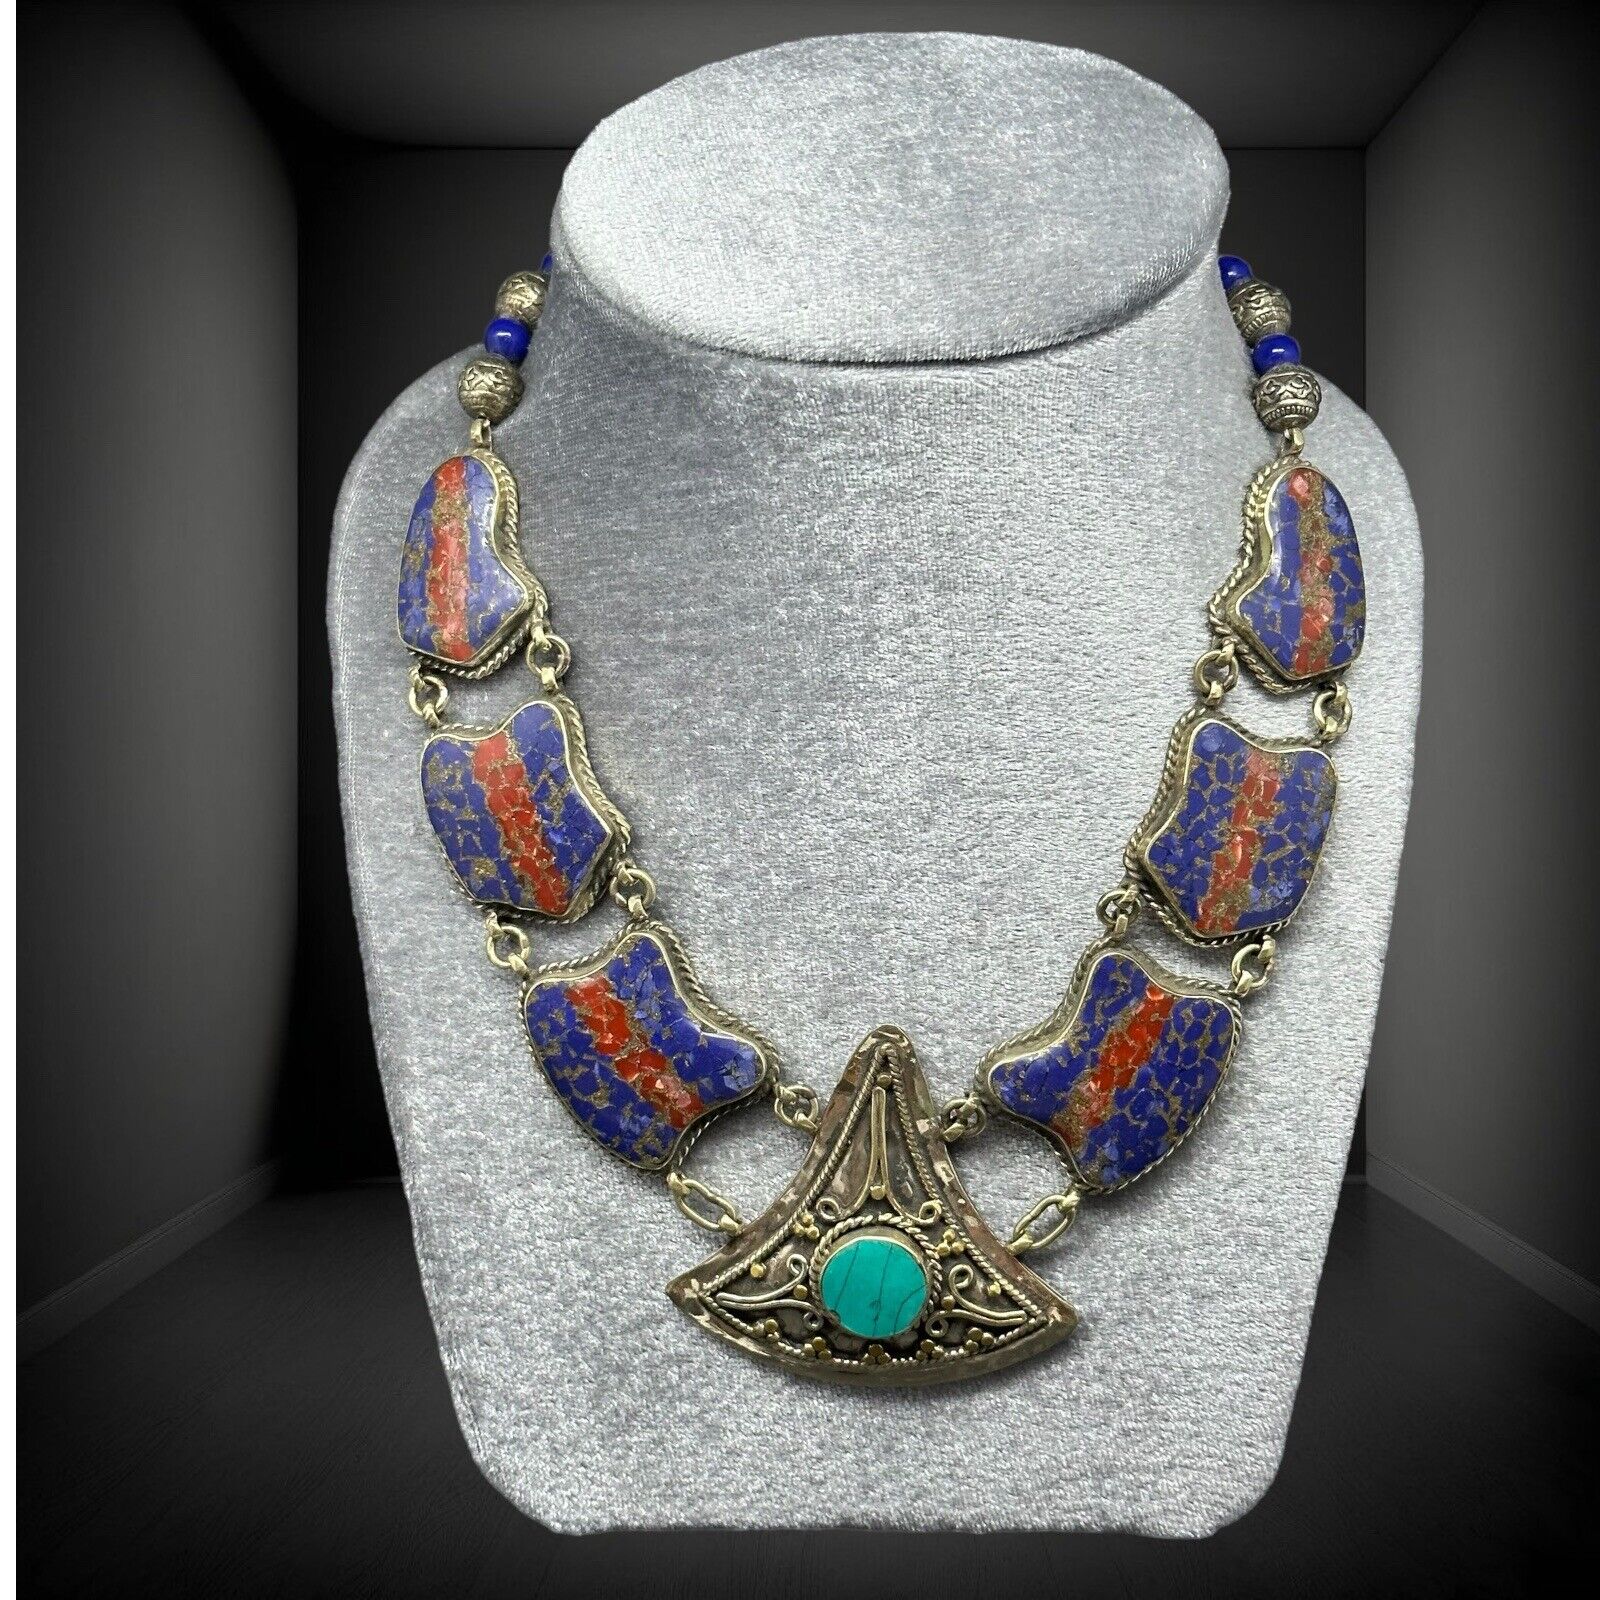 Stunning Nepal Jewelry Silver Plated Unique Necklace With Lapis Coral Stones 20\